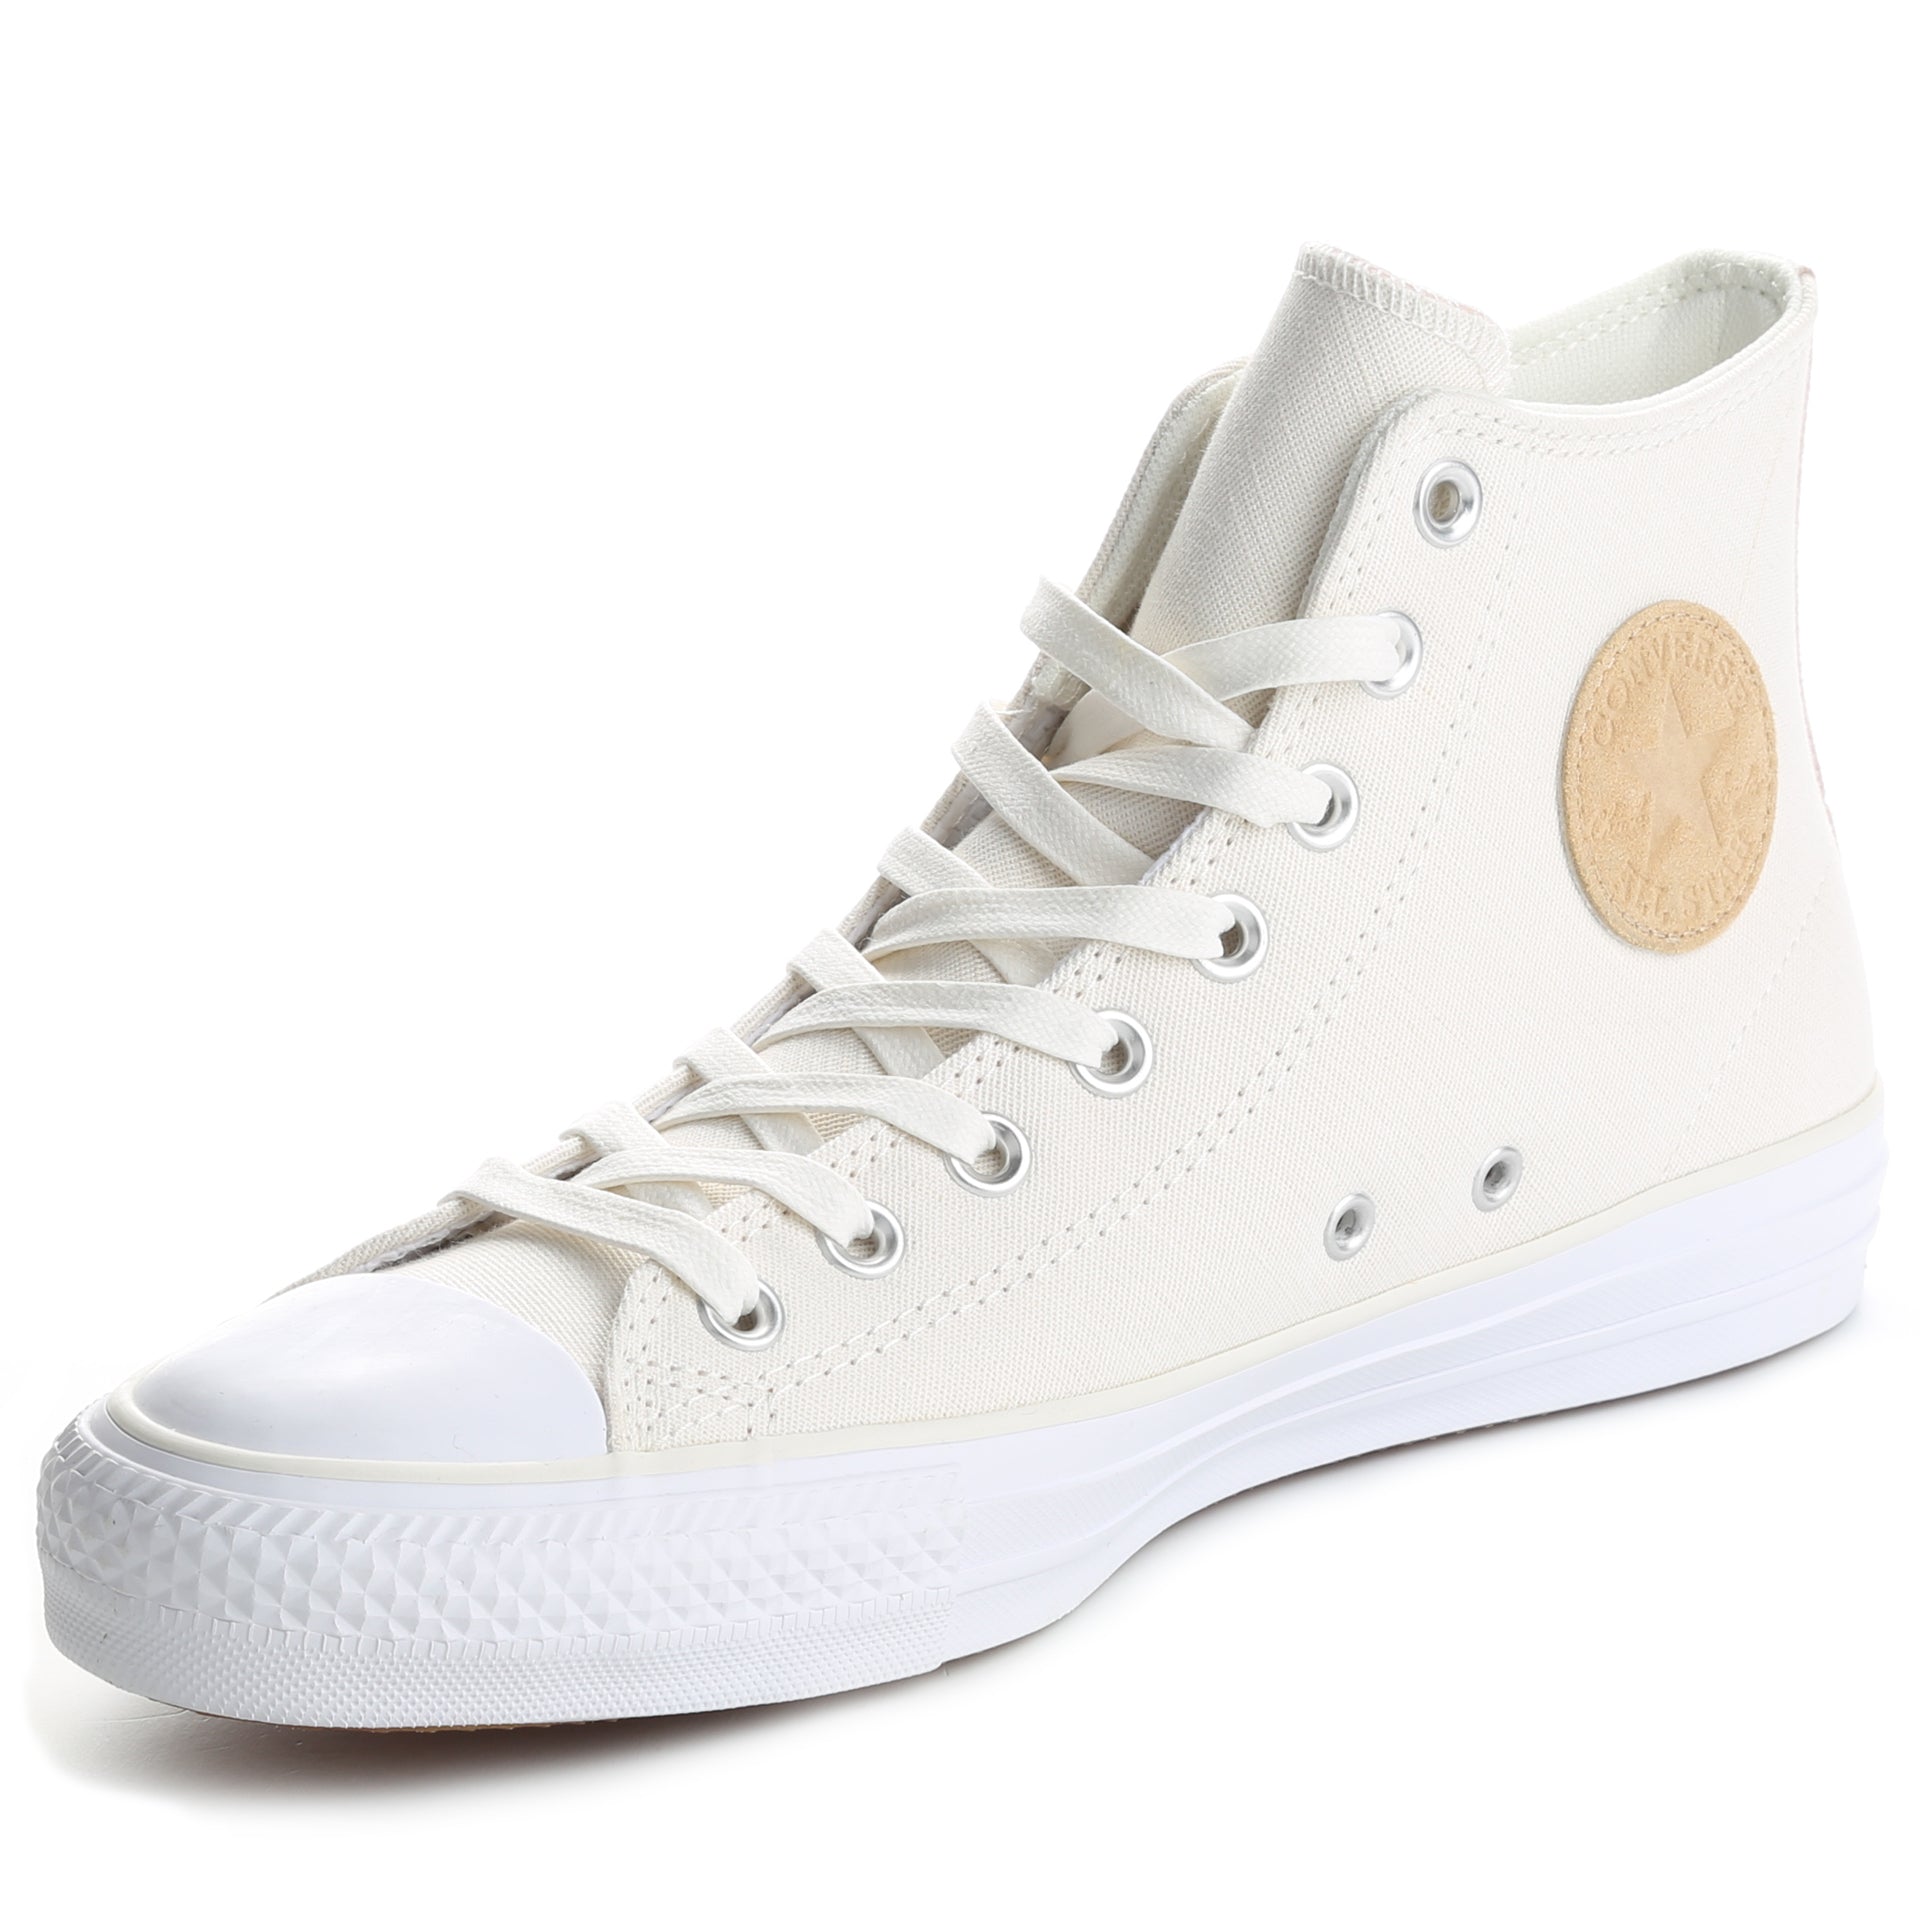 converse ctas pro suede backed twill high top